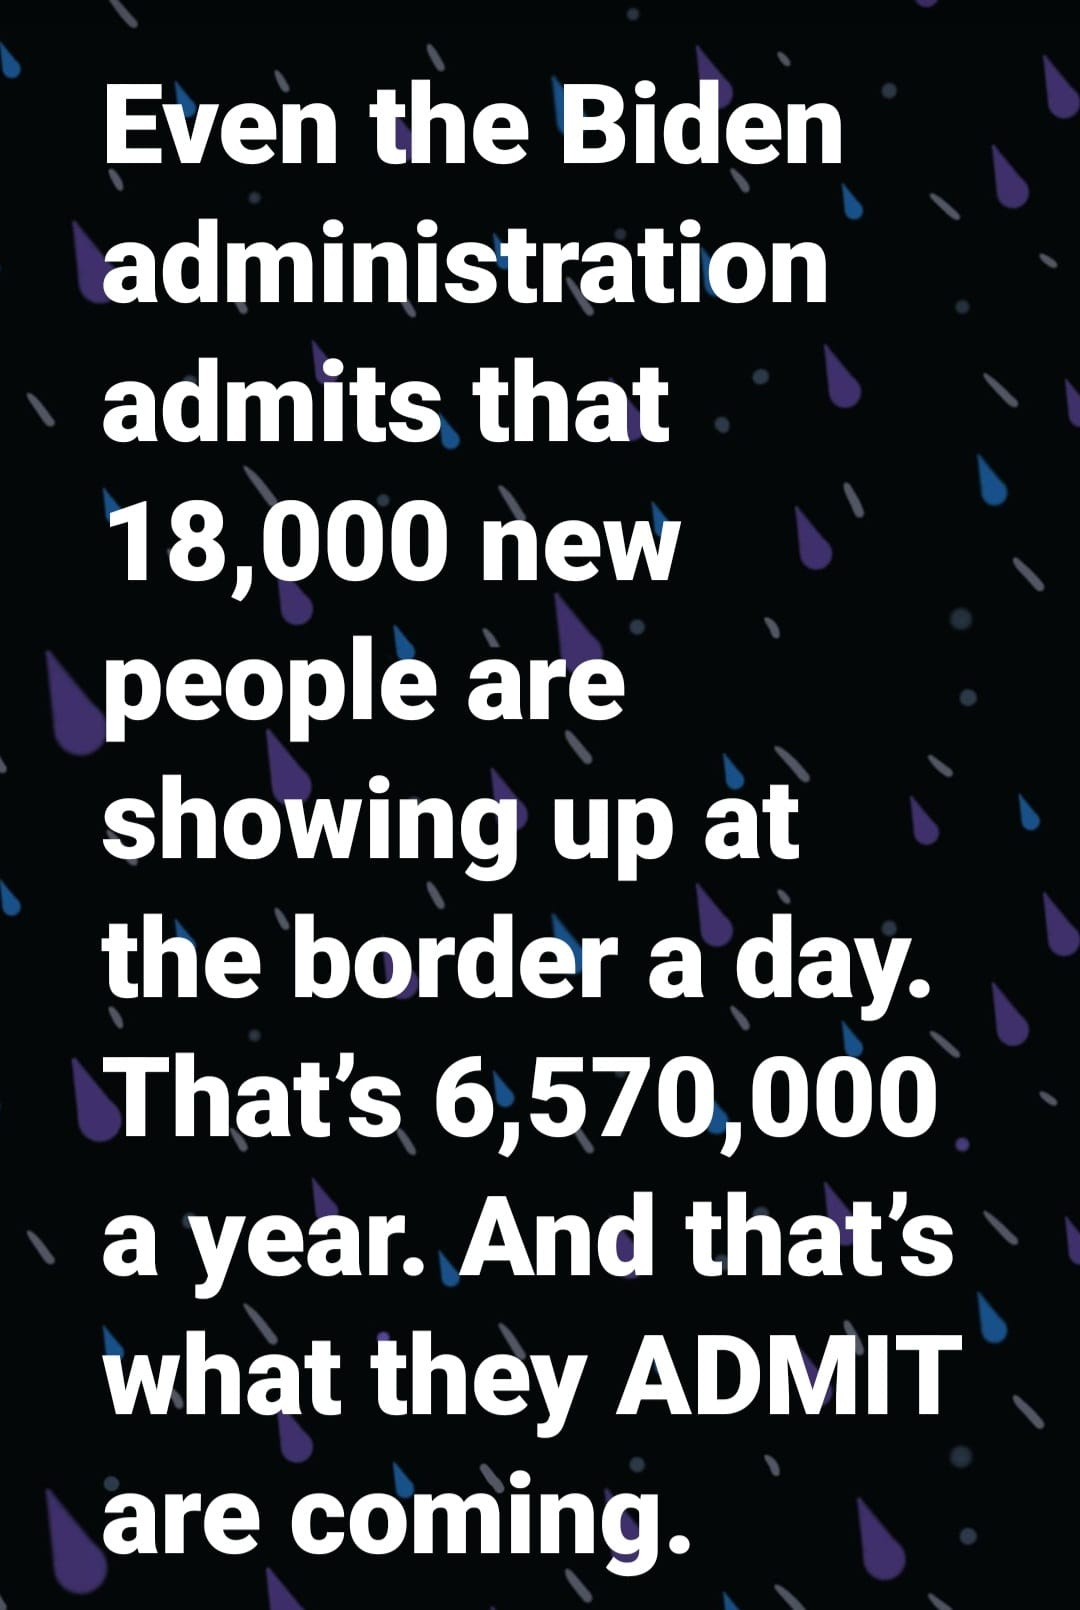 May be an image of text that says 'Even the Biden administration admits that 18,000 new people are showing up at the border a day. That's 6,570,0 a year. And that's what they ADMIT are coming.'